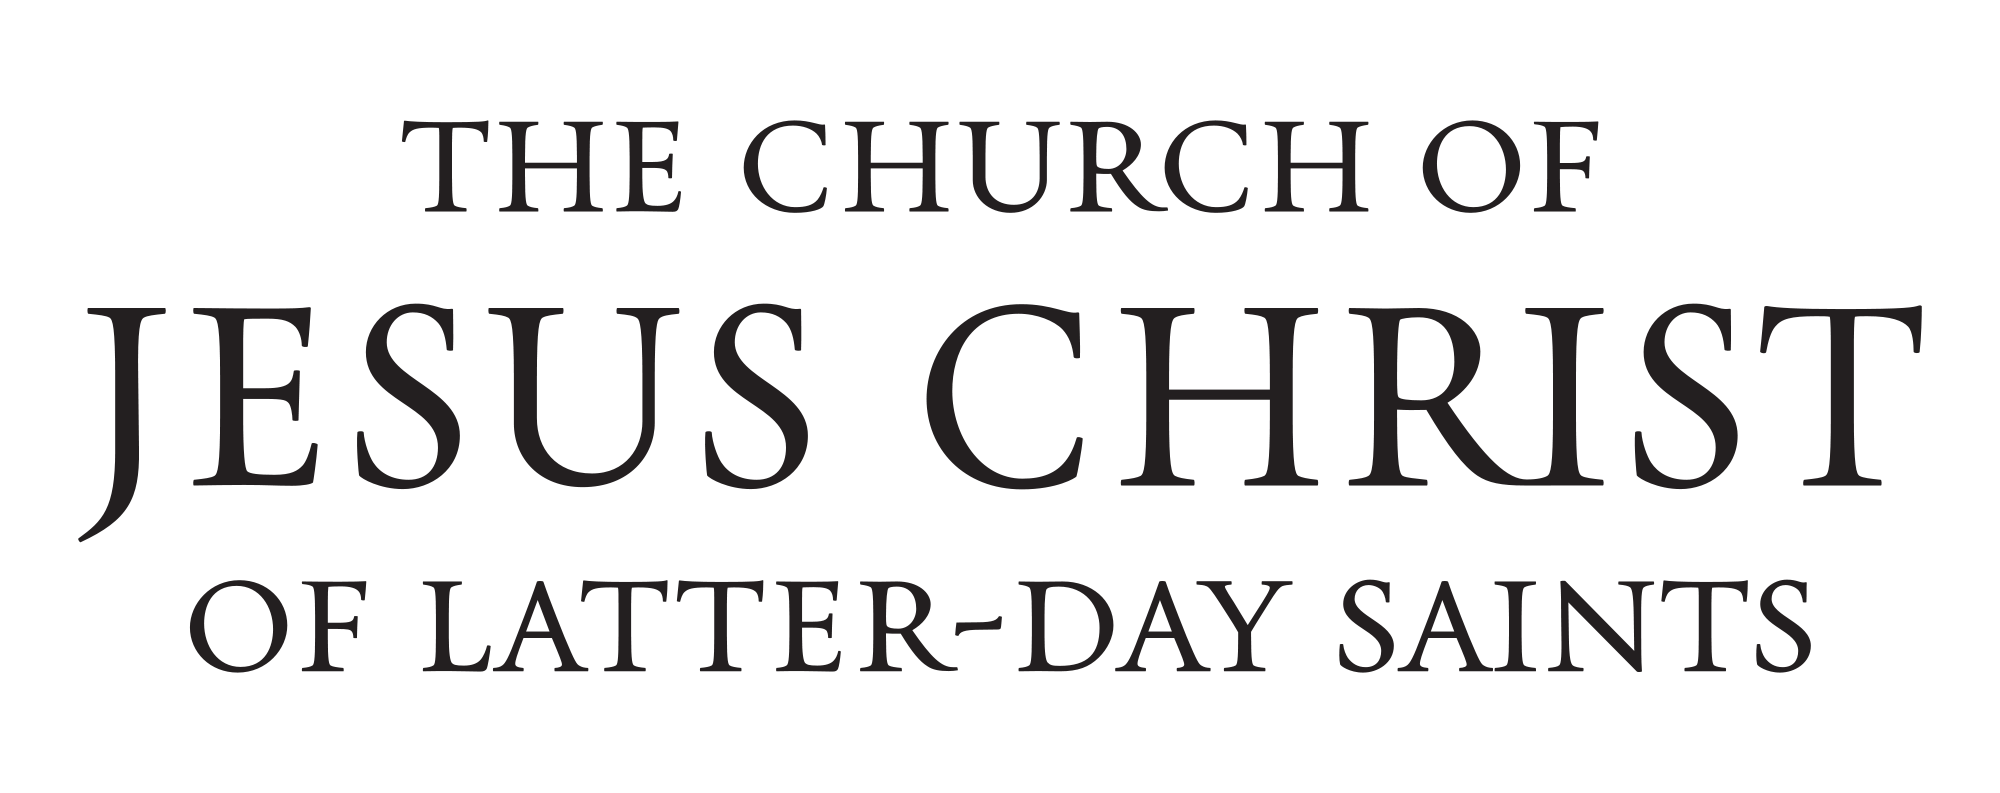 LDS logo.png